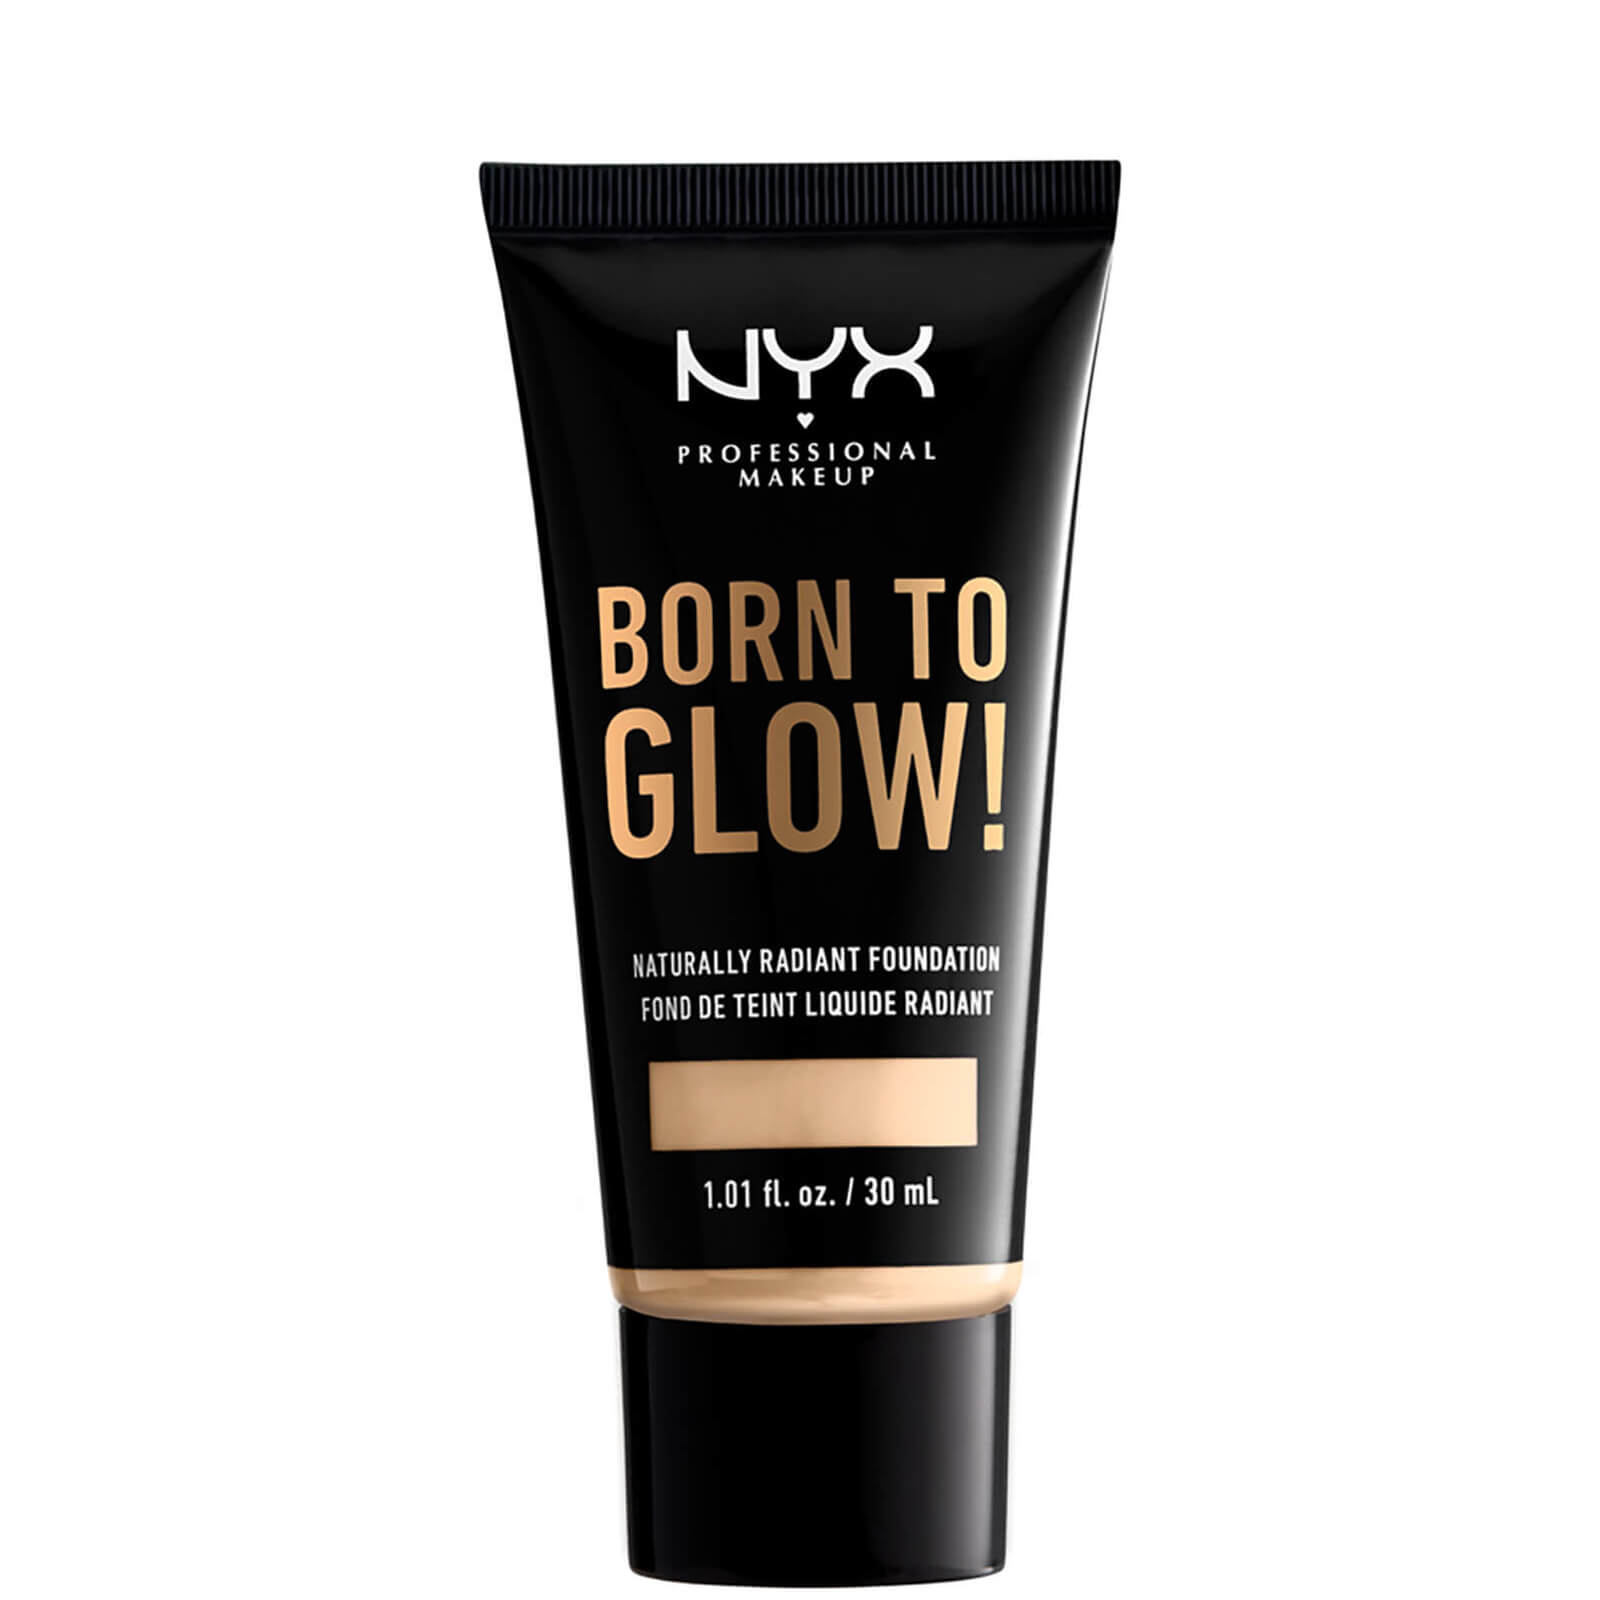 nyx professional makeup born to glow naturally radiant foundation 30ml (various shades) - pale